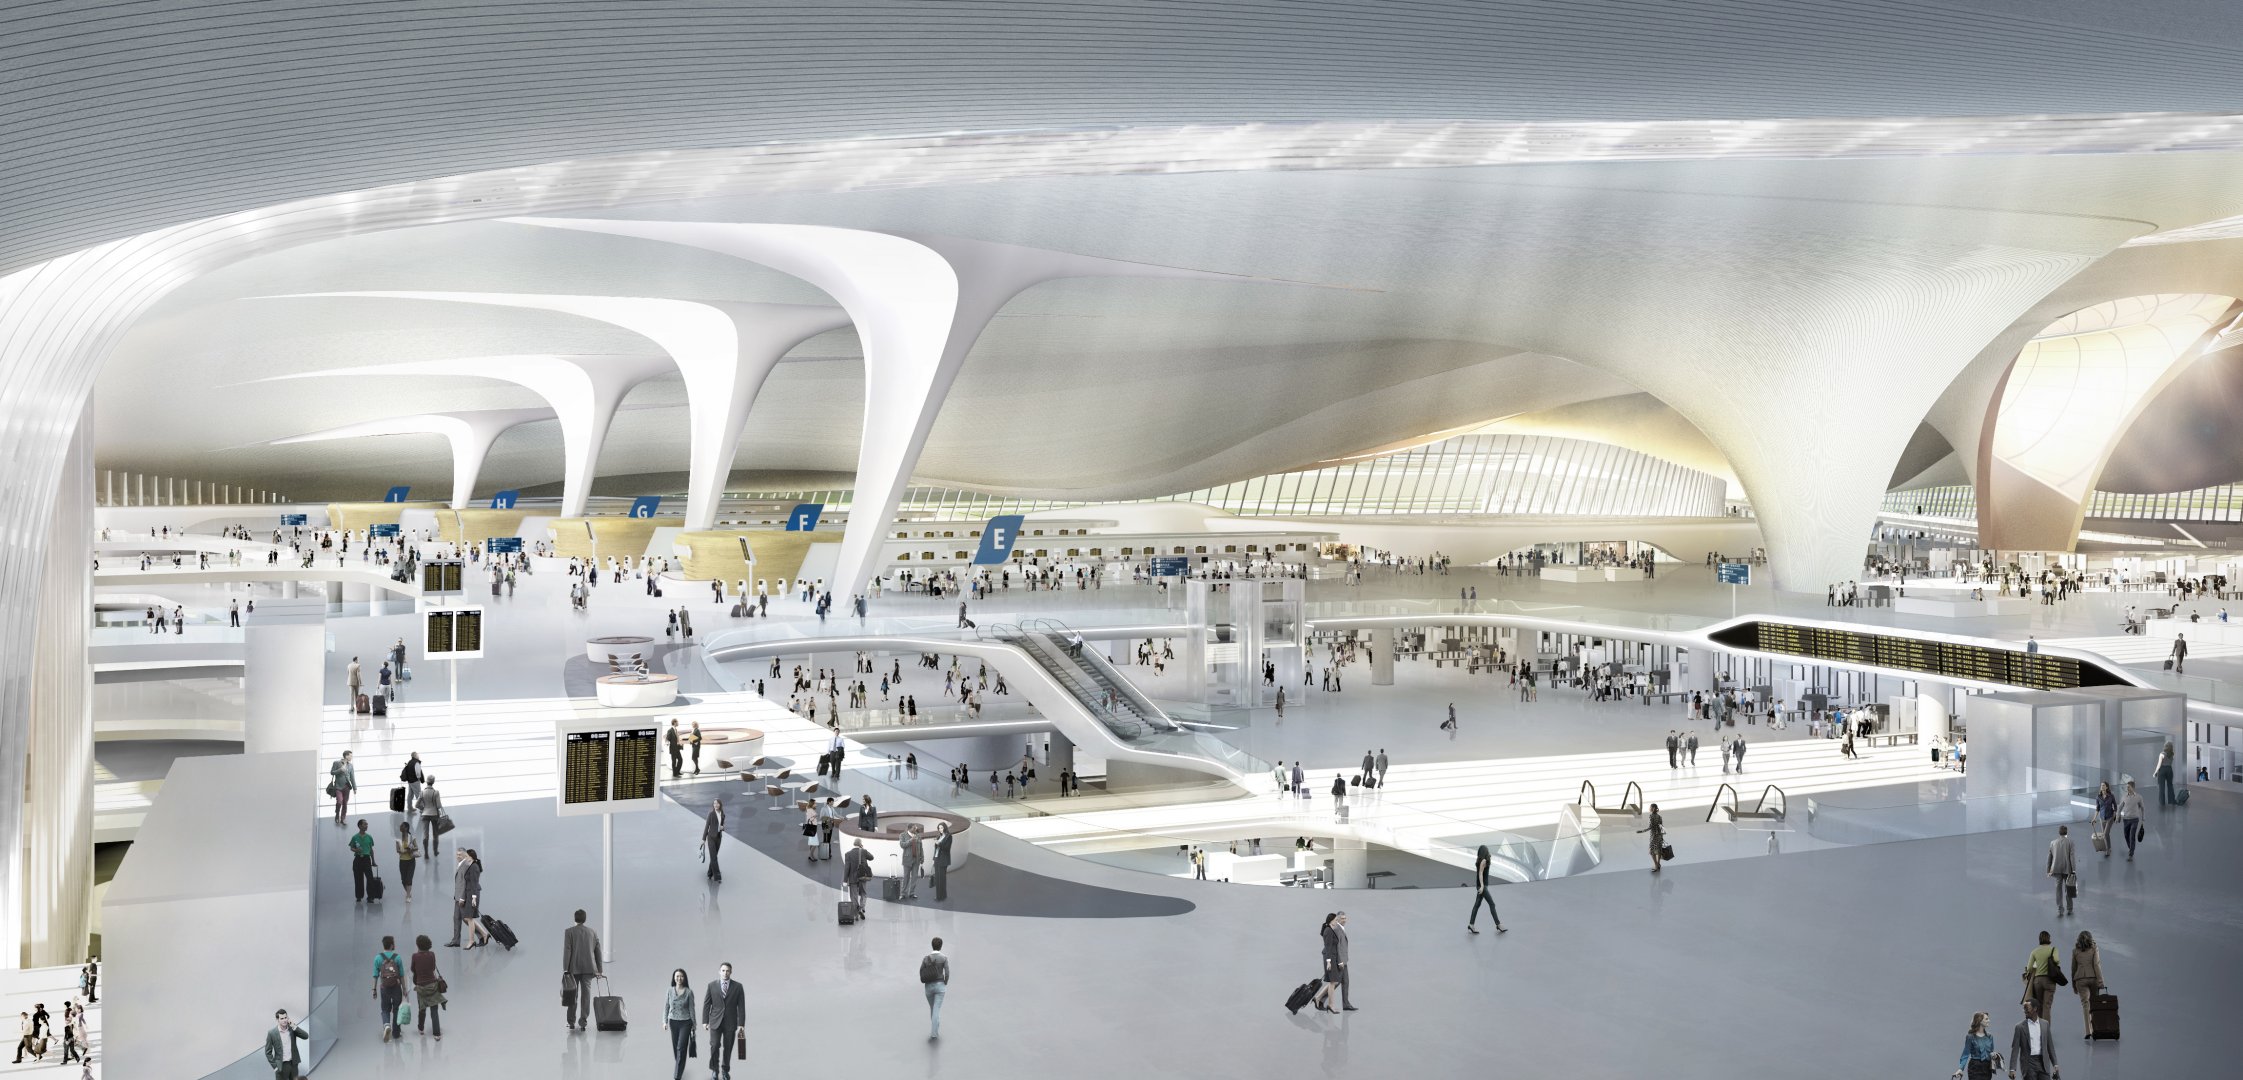 Beijing’s New Airport Terminal Looks More Like A Gigantic Spaceport